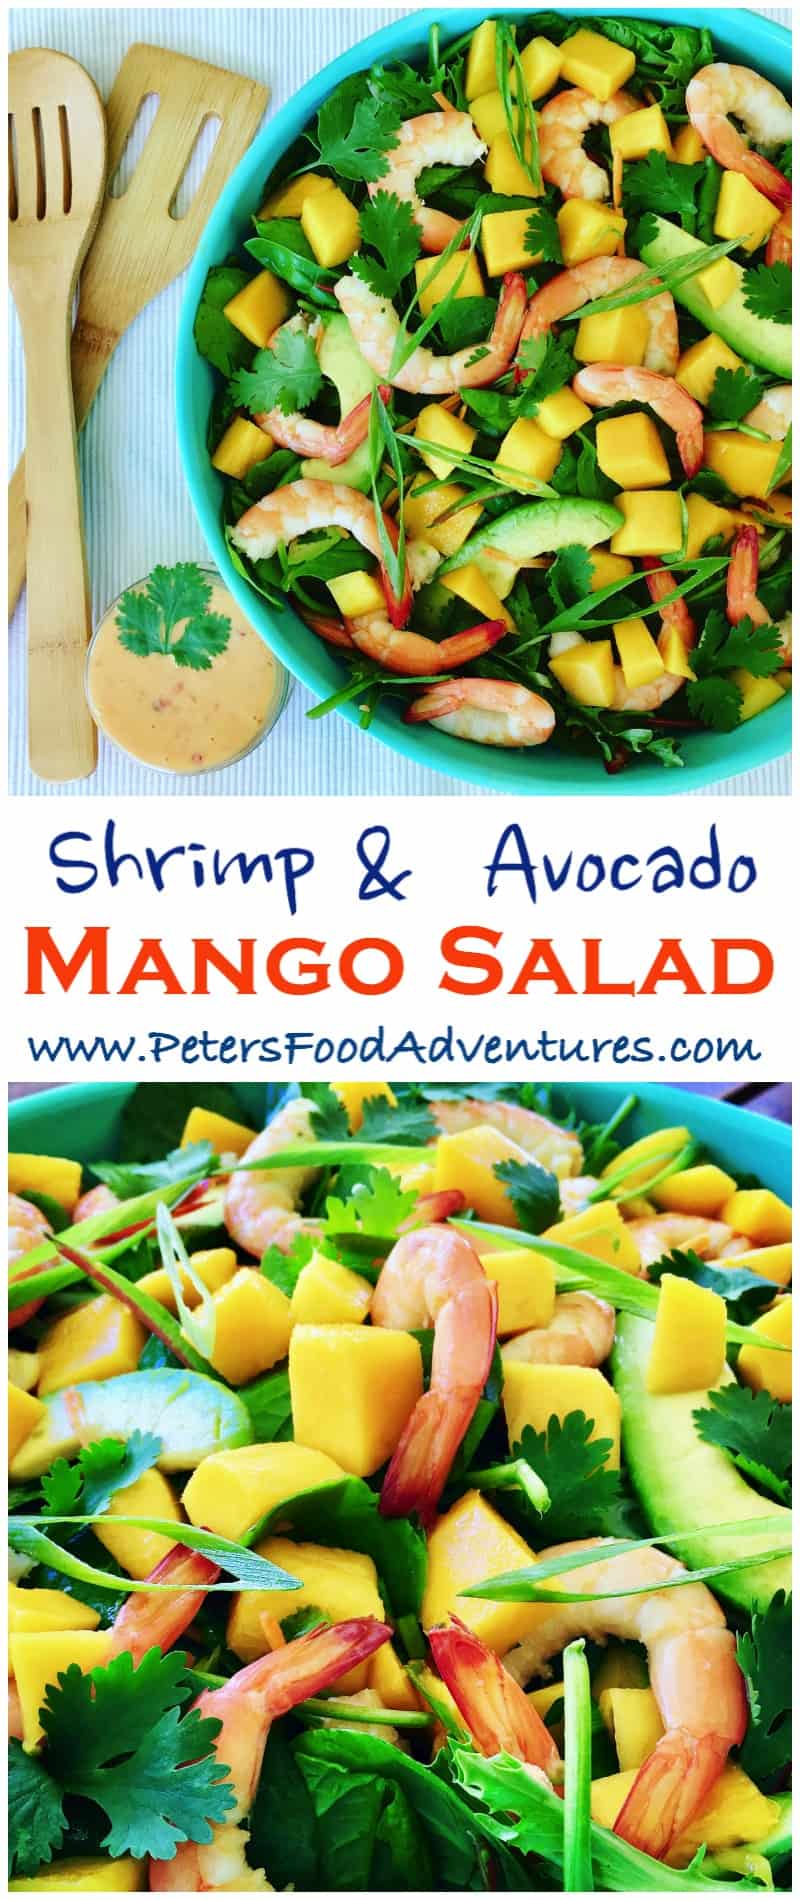 This Prawn and Avocado Mango Salad is delicious, fresh and healthy - made with an easy creamy Sweet Chili n Lime Dressing - Shrimp Mango Salad